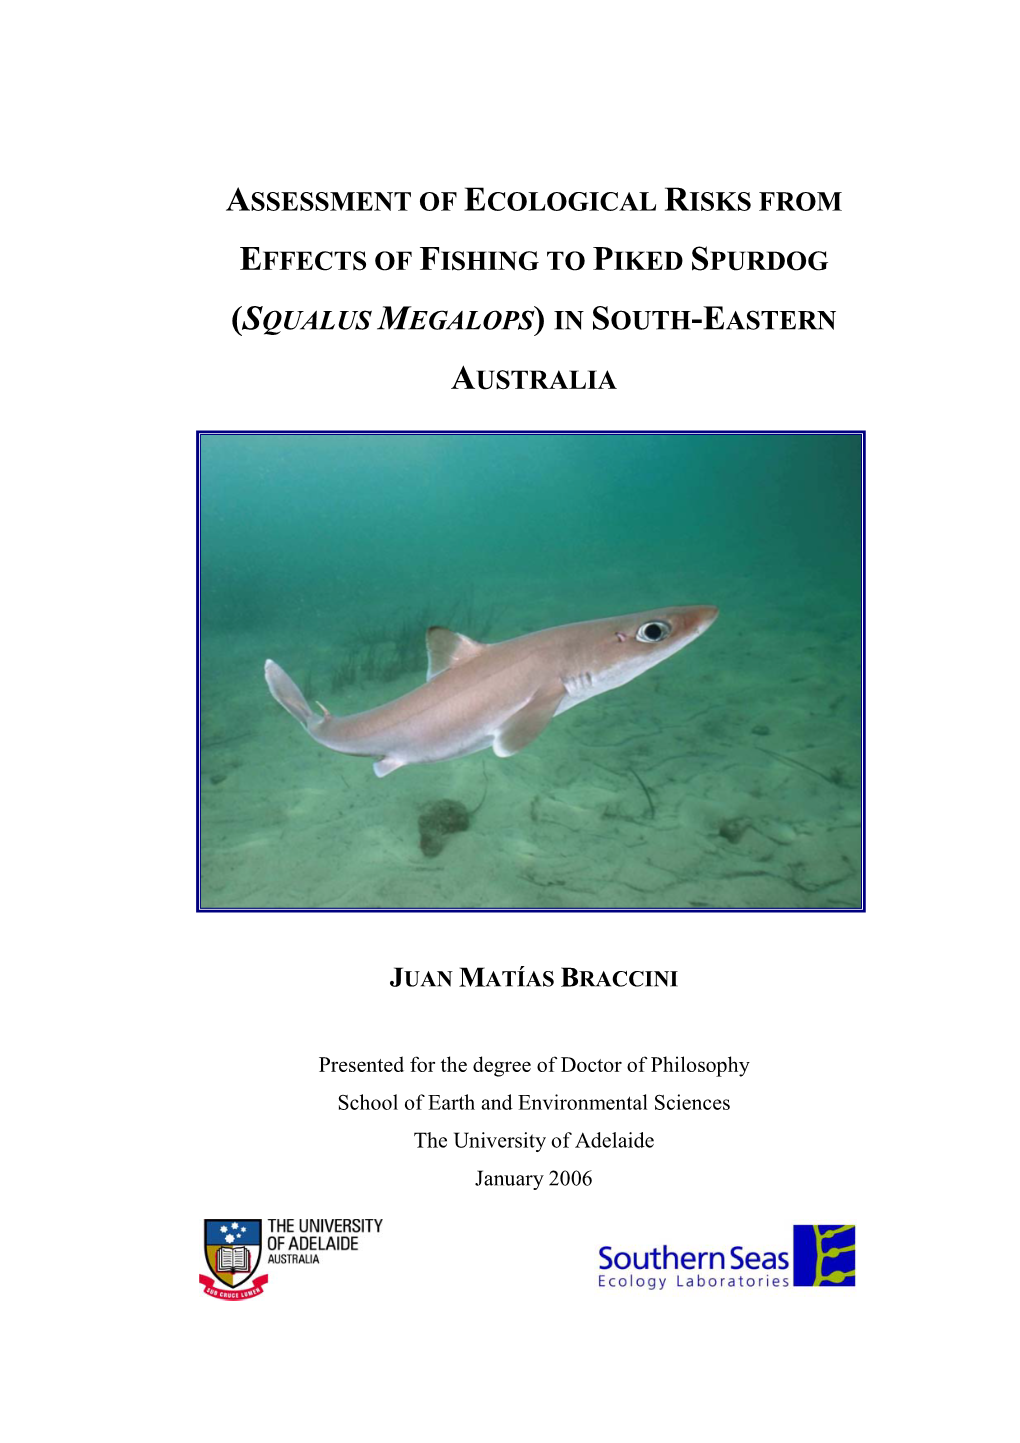 Assessment of Ecological Risks from Effects of Fishing to Piked Spurdog